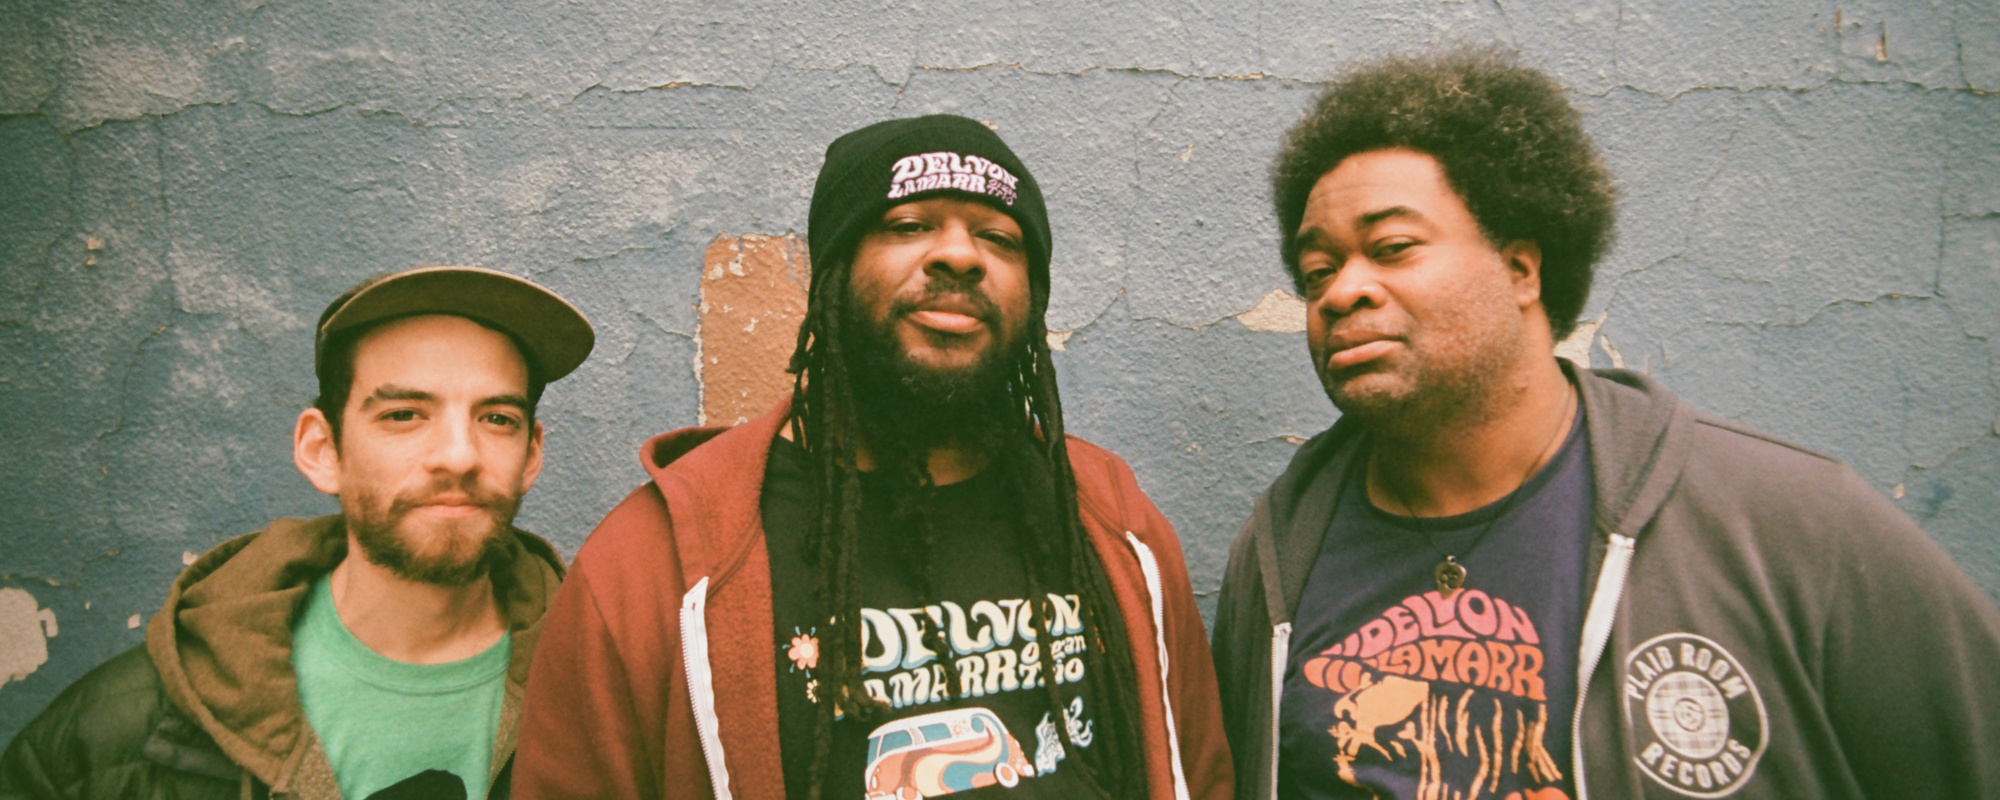 Review: The Delvon Lamarr Organ Trio Brings The Heat on Cold As Weiss